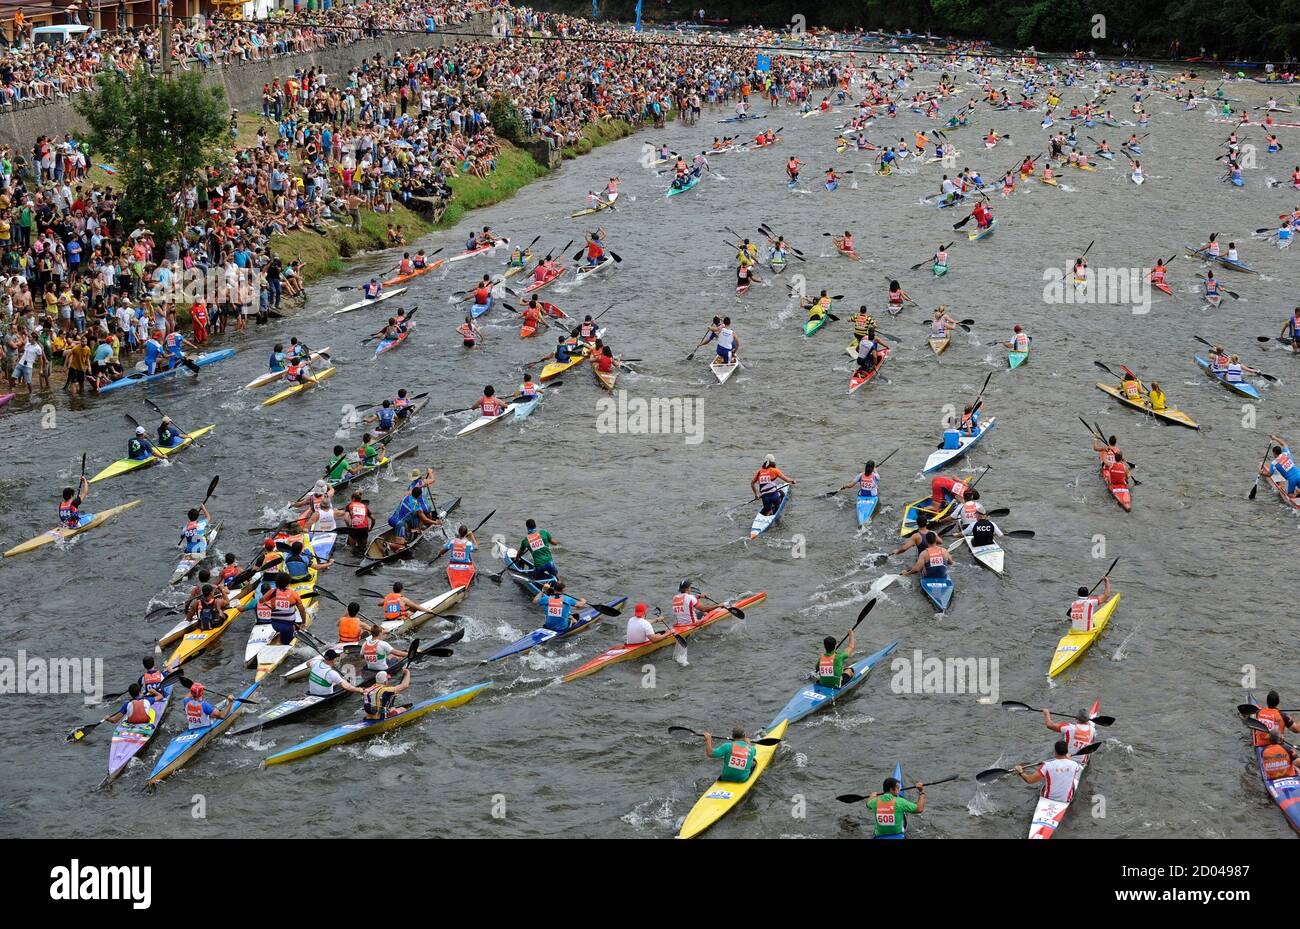 Canoeists start the annual International Descent of the River Sella in  Arriondas August 6, 2011. The race finished in Ribadesella in the northern  region of Asturias. REUTERS/Eloy Alonso (SPAIN - Tags: SPORT